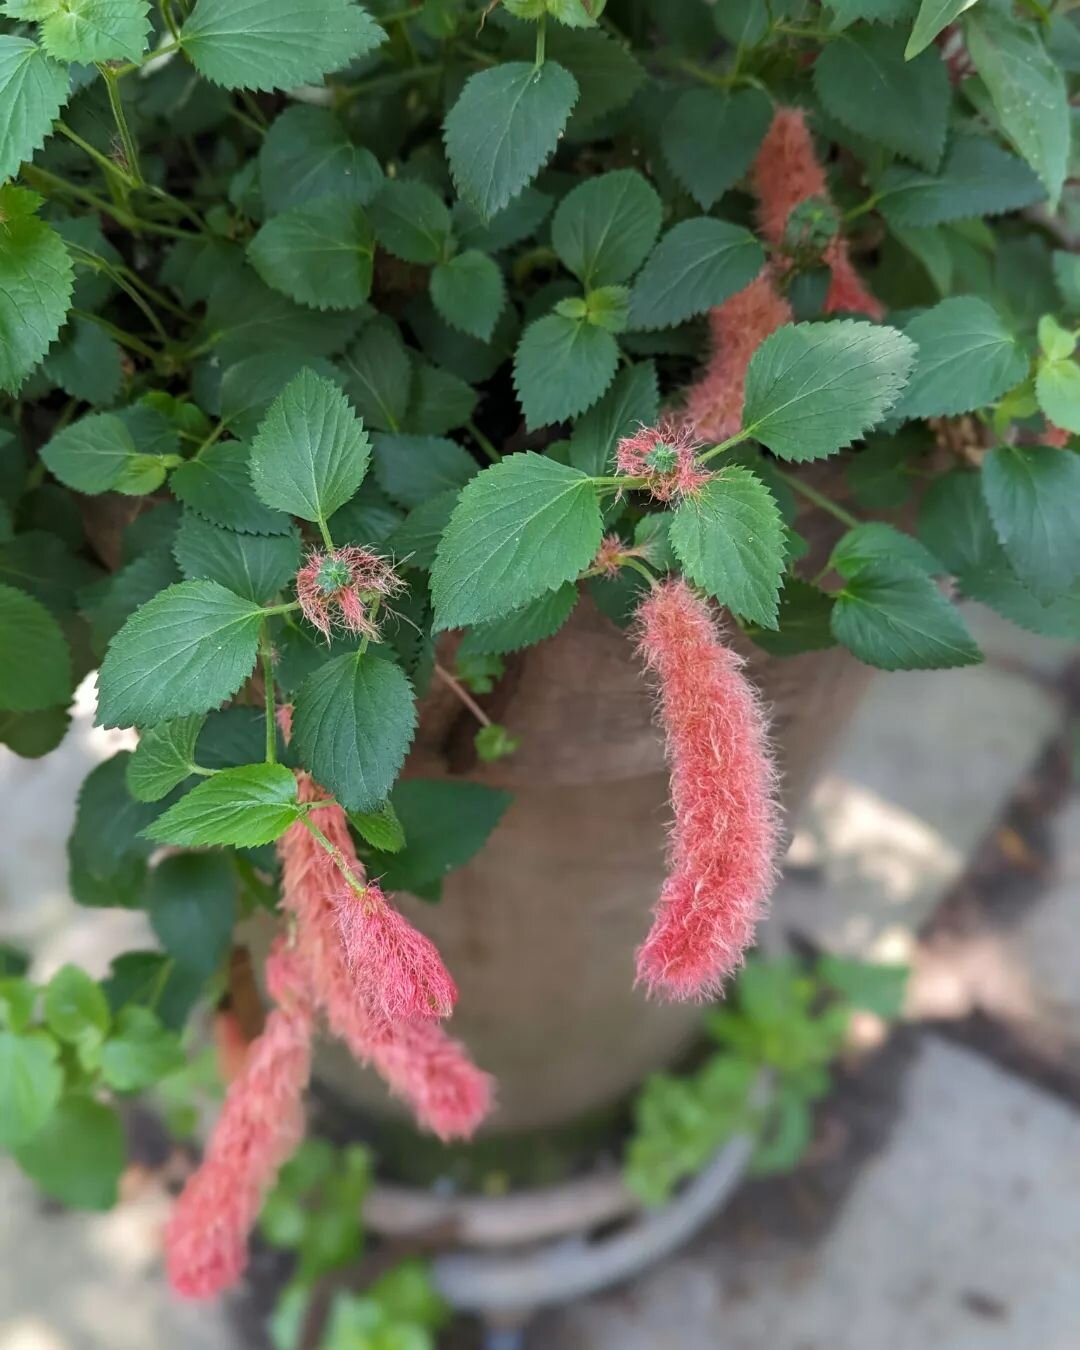 I grabbed this Chenille Firetail when I saw it at the nursery because I don't find them much. Great shade plant! #chenillefiretail

Garden Report

The heat has pssed here in Boston (for the moment). Longer work days for me because its cooler! I don't